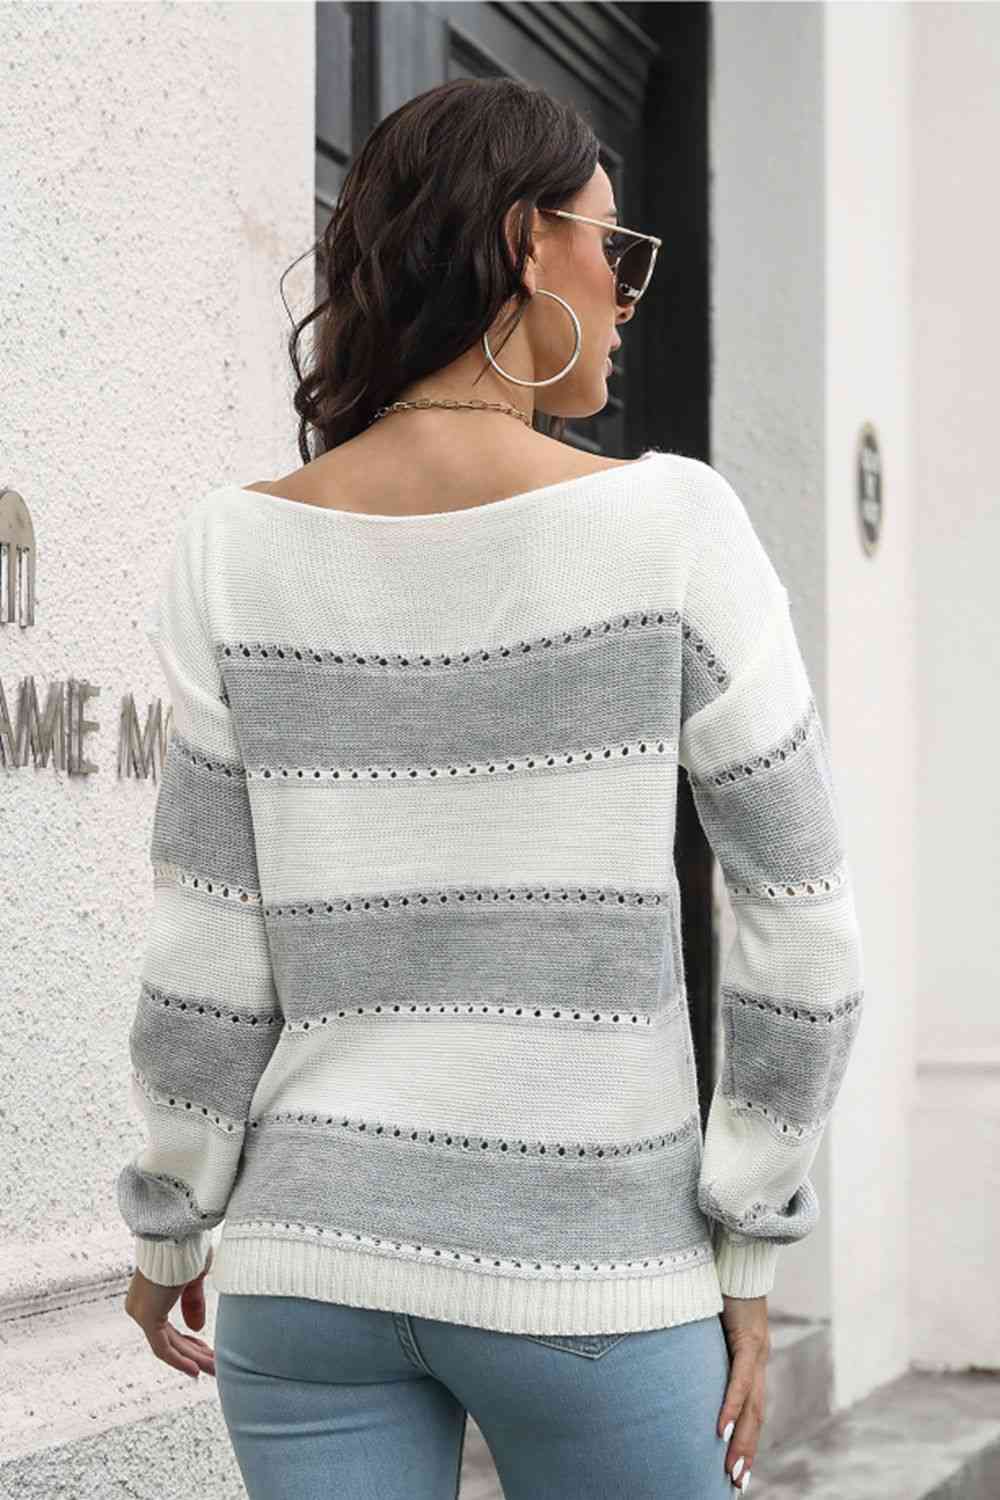 Striped Boat Neck Dropped Shoulder Sweater (4 Colors) Shirts & Tops Krazy Heart Designs Boutique   